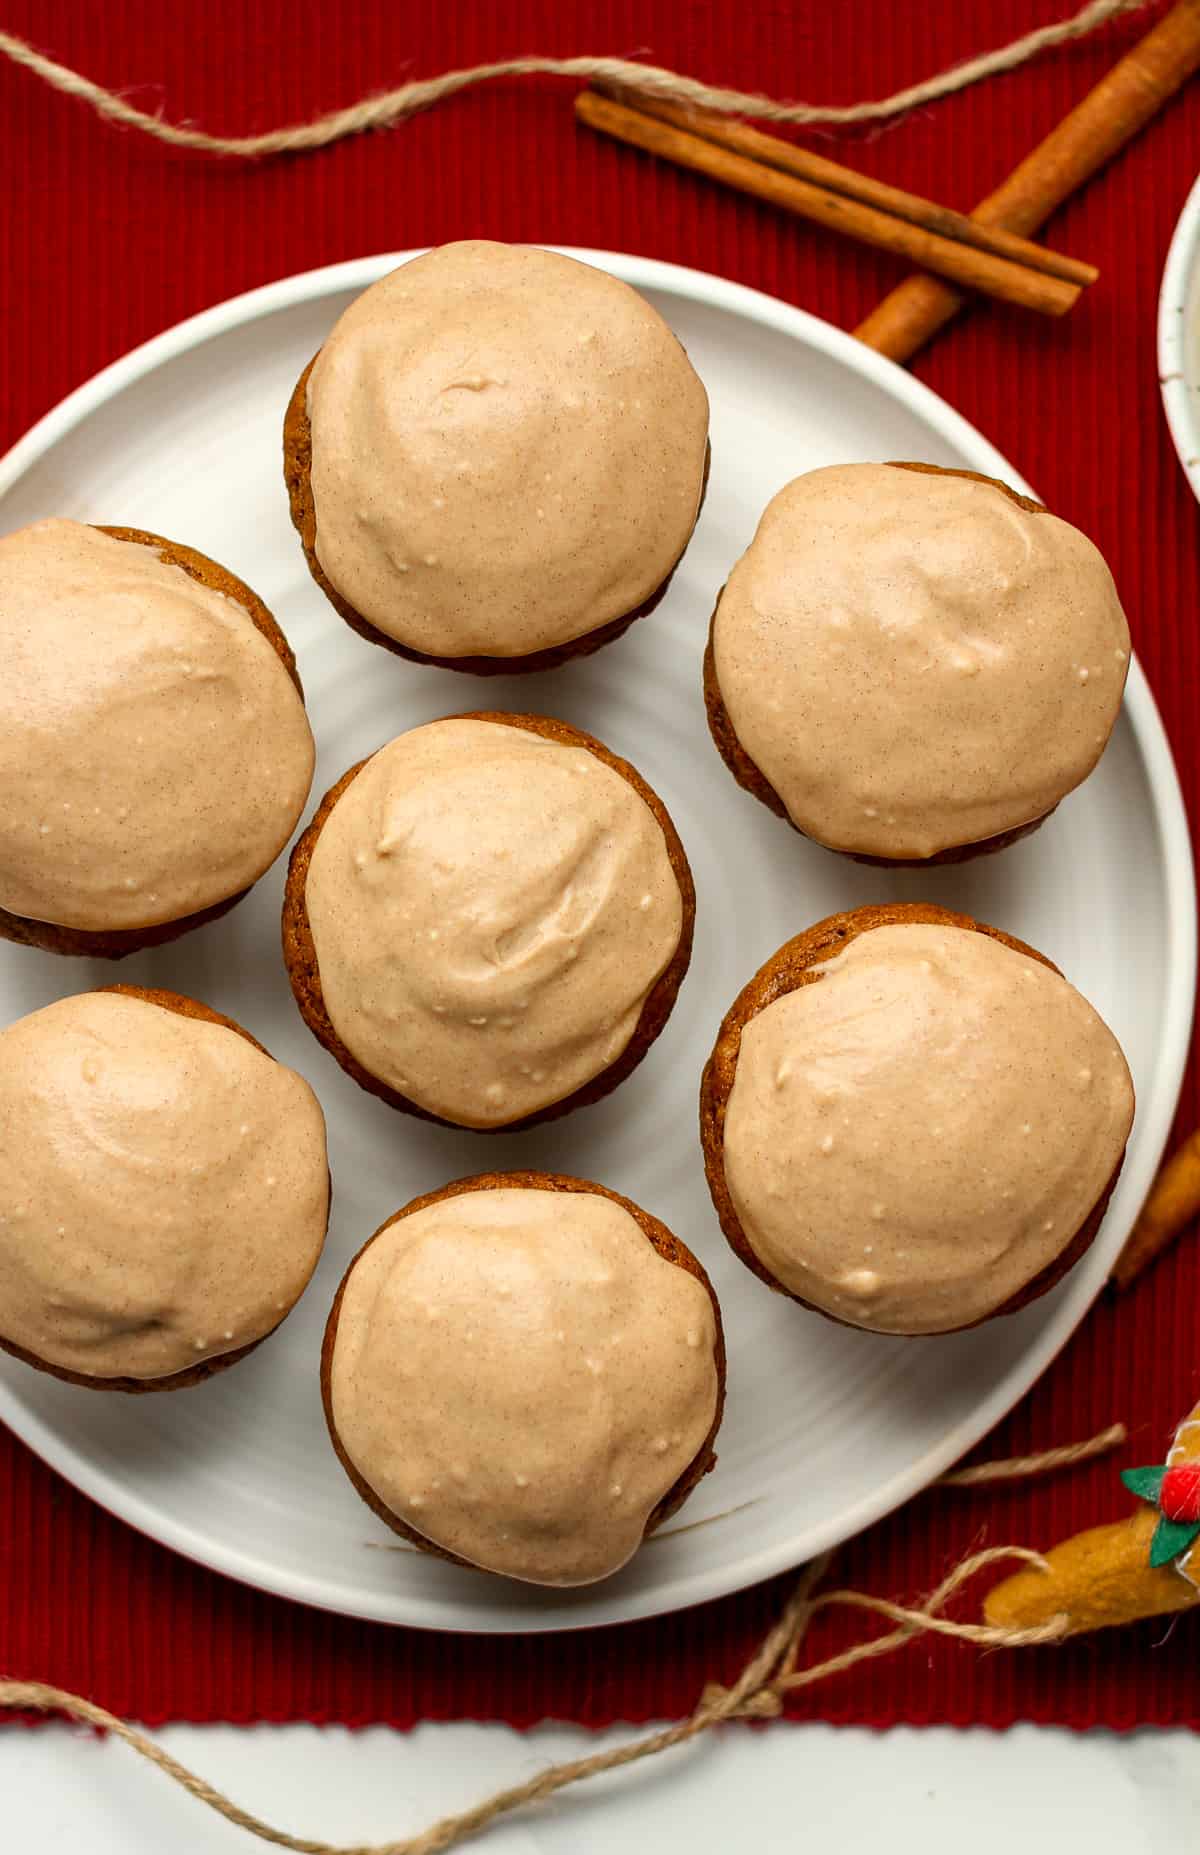 A plate of seven muffins with icing.